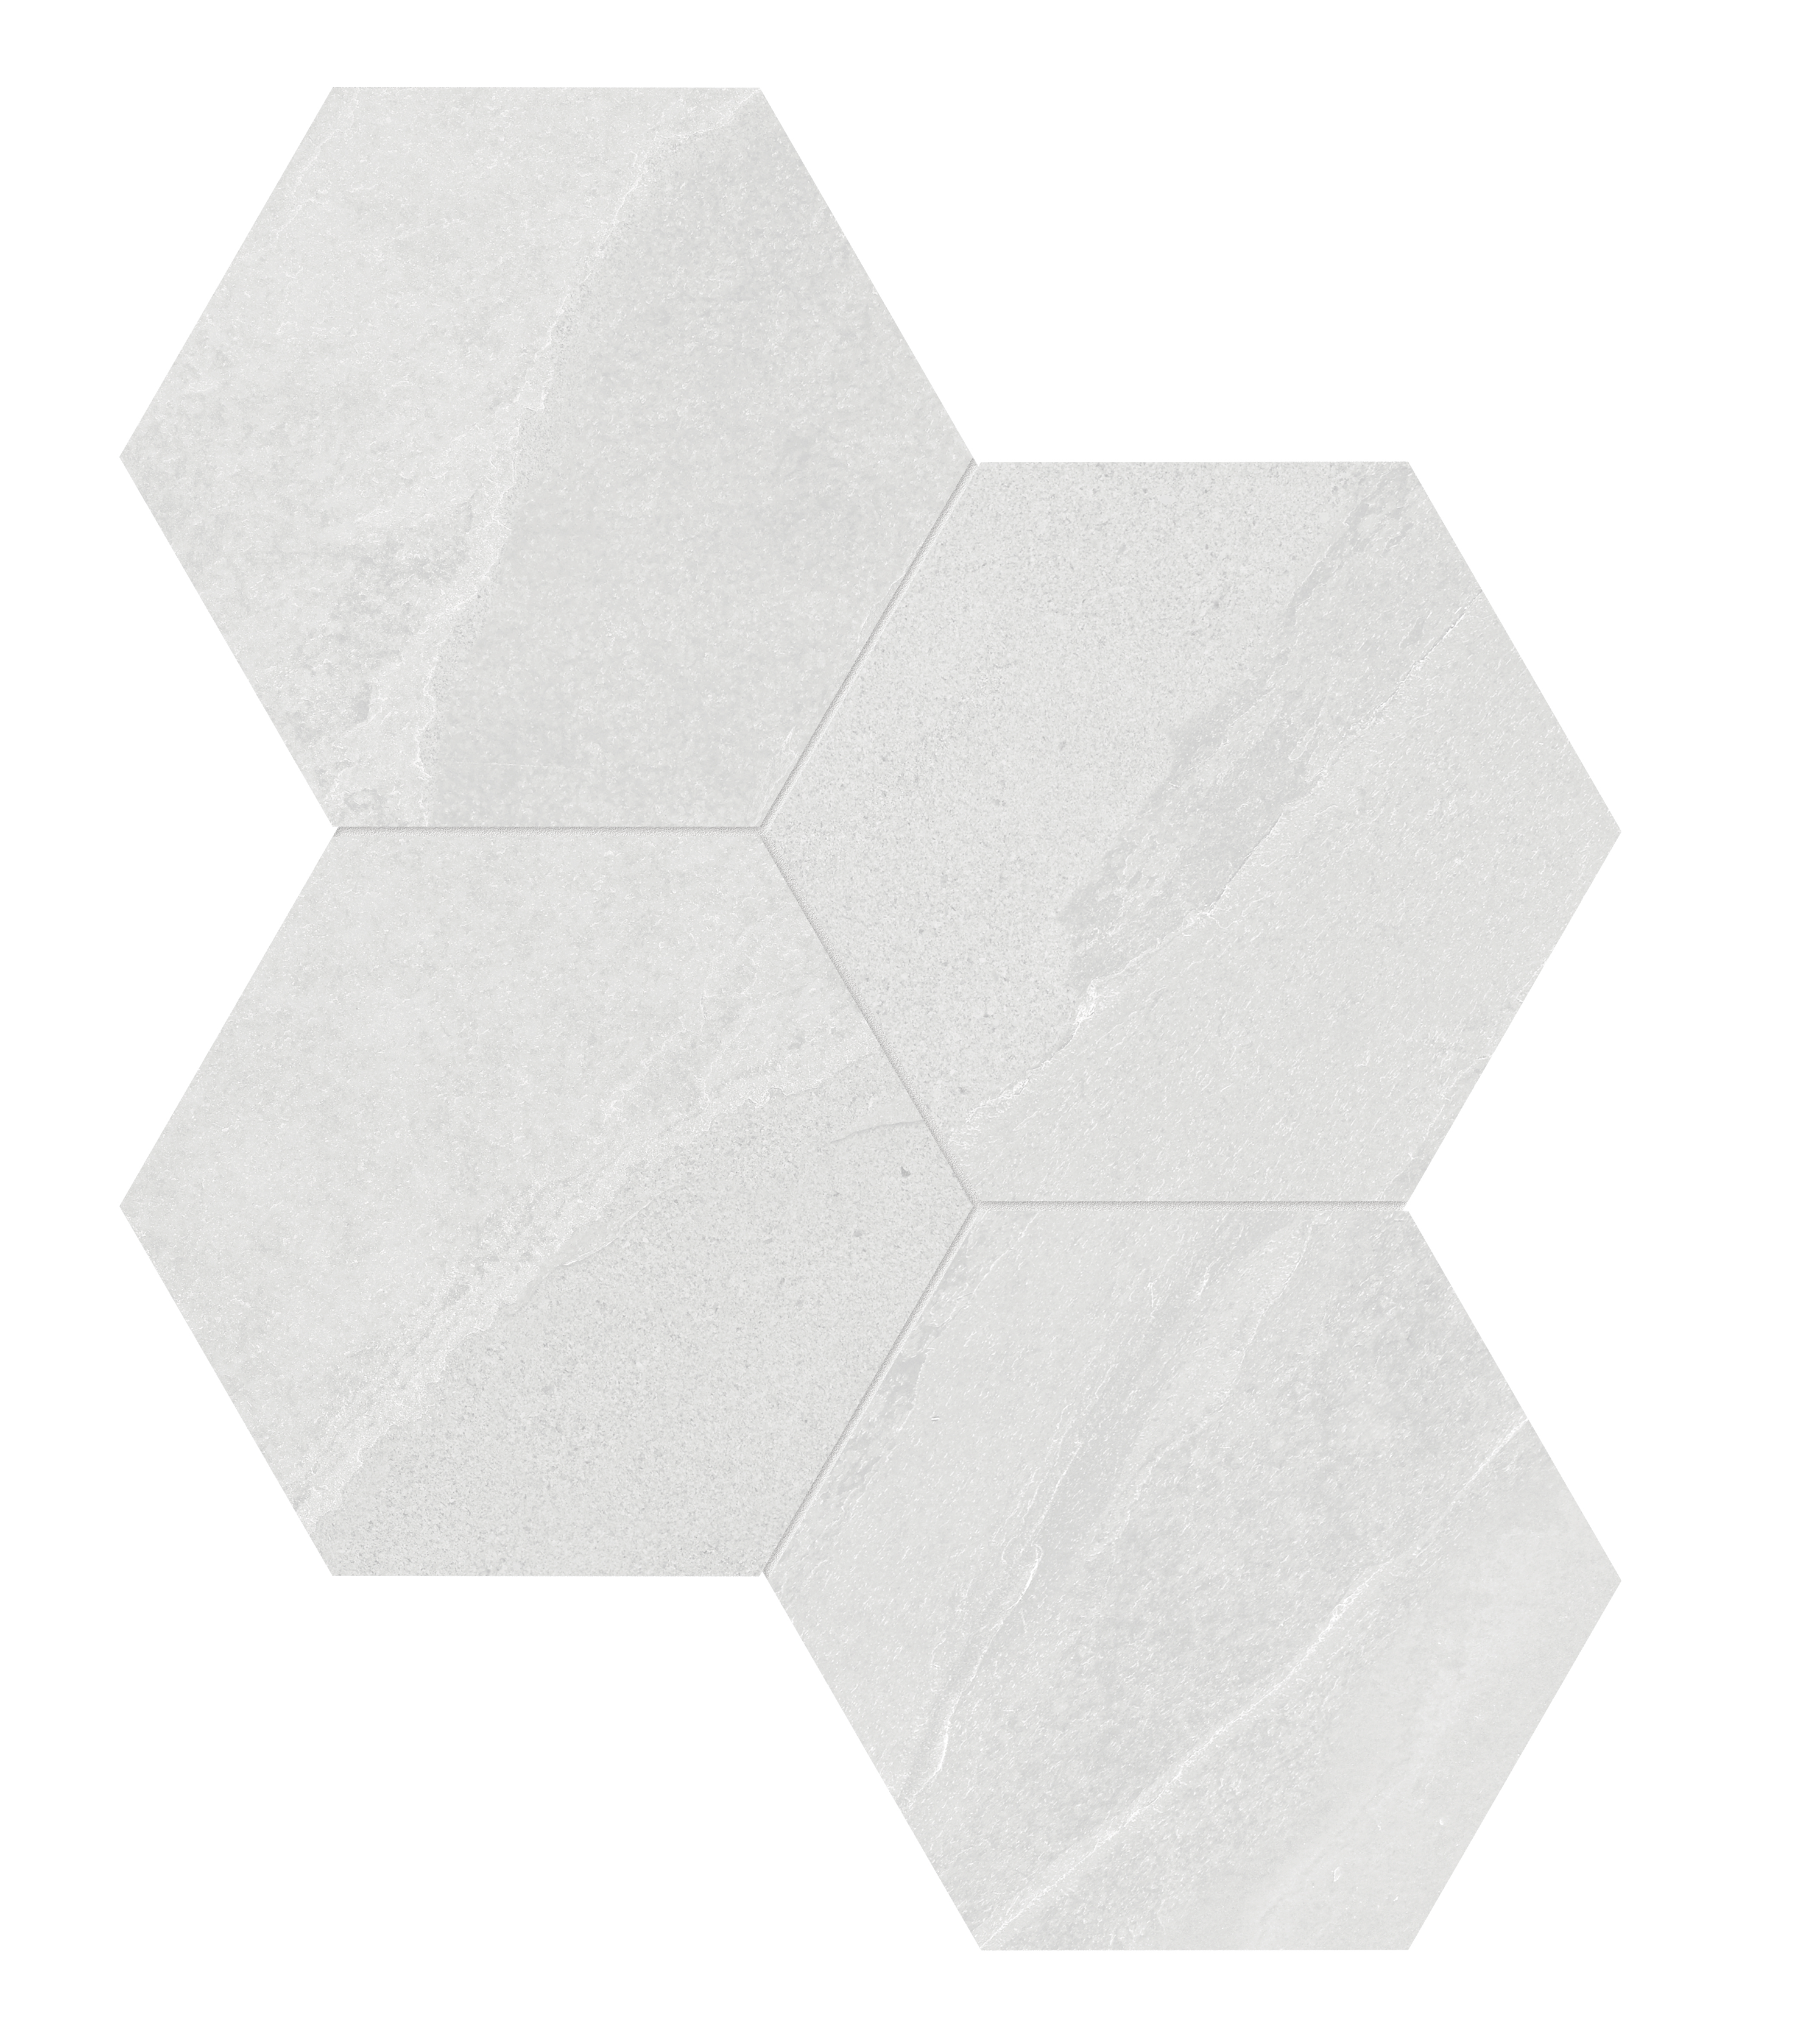 lithium hexagon 6-inch pattern color body porcelain mosaic from nord anatolia collection distributed by surface group international matte finish straight edge edge mesh shape